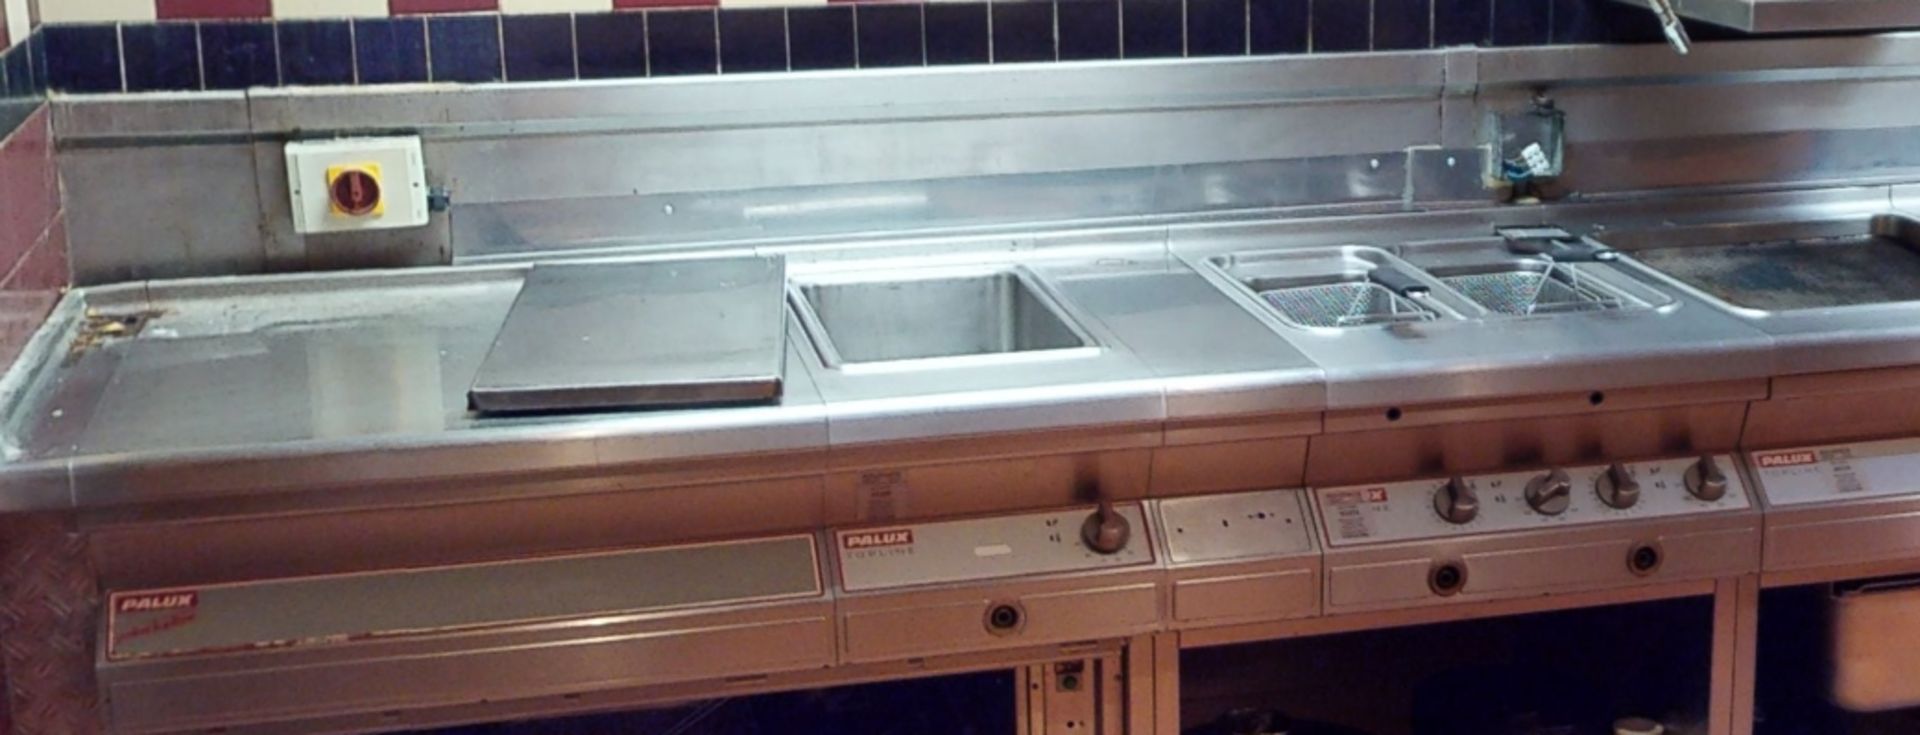 1 x PALUX TOPLINE Cooking Station - Approx 8m Length - Includes 13 units - Gas and Electric Powered - Image 11 of 14